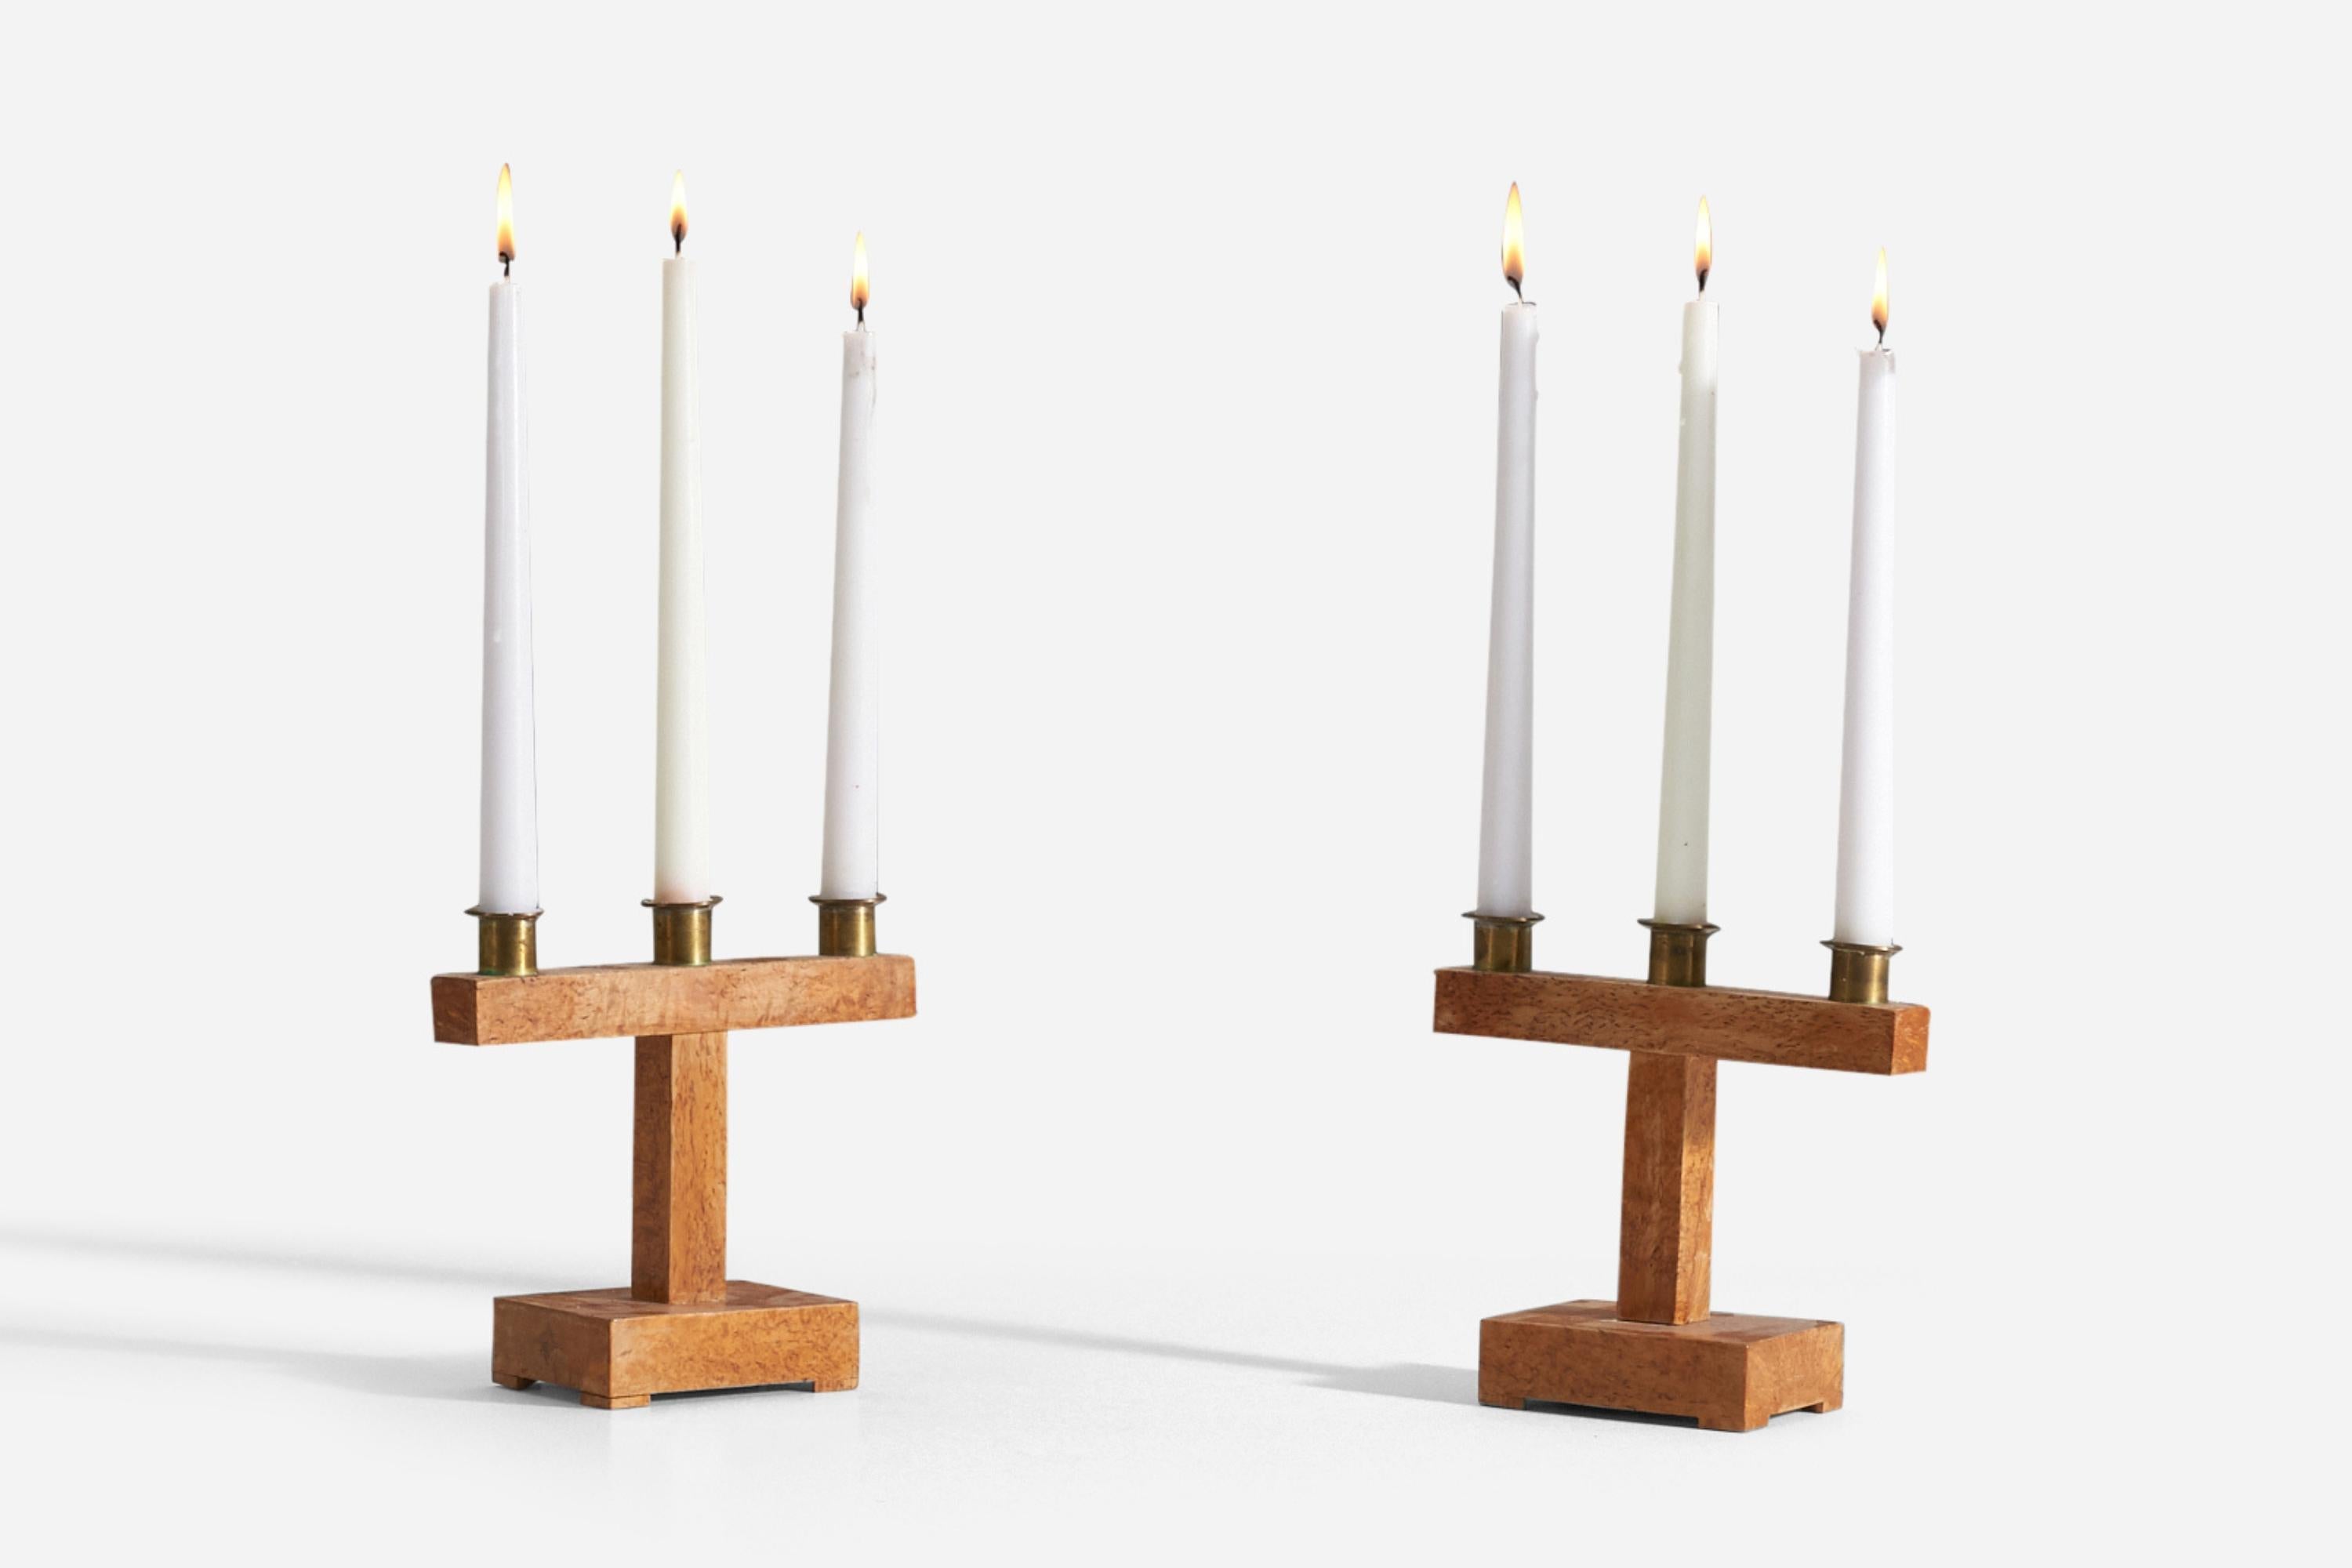 A pair of sculptural / Minimalist candlesticks. Designed and produced in Sweden, 1930s. The simplicity of the form enhances the beauty of the masur birch. Signed 